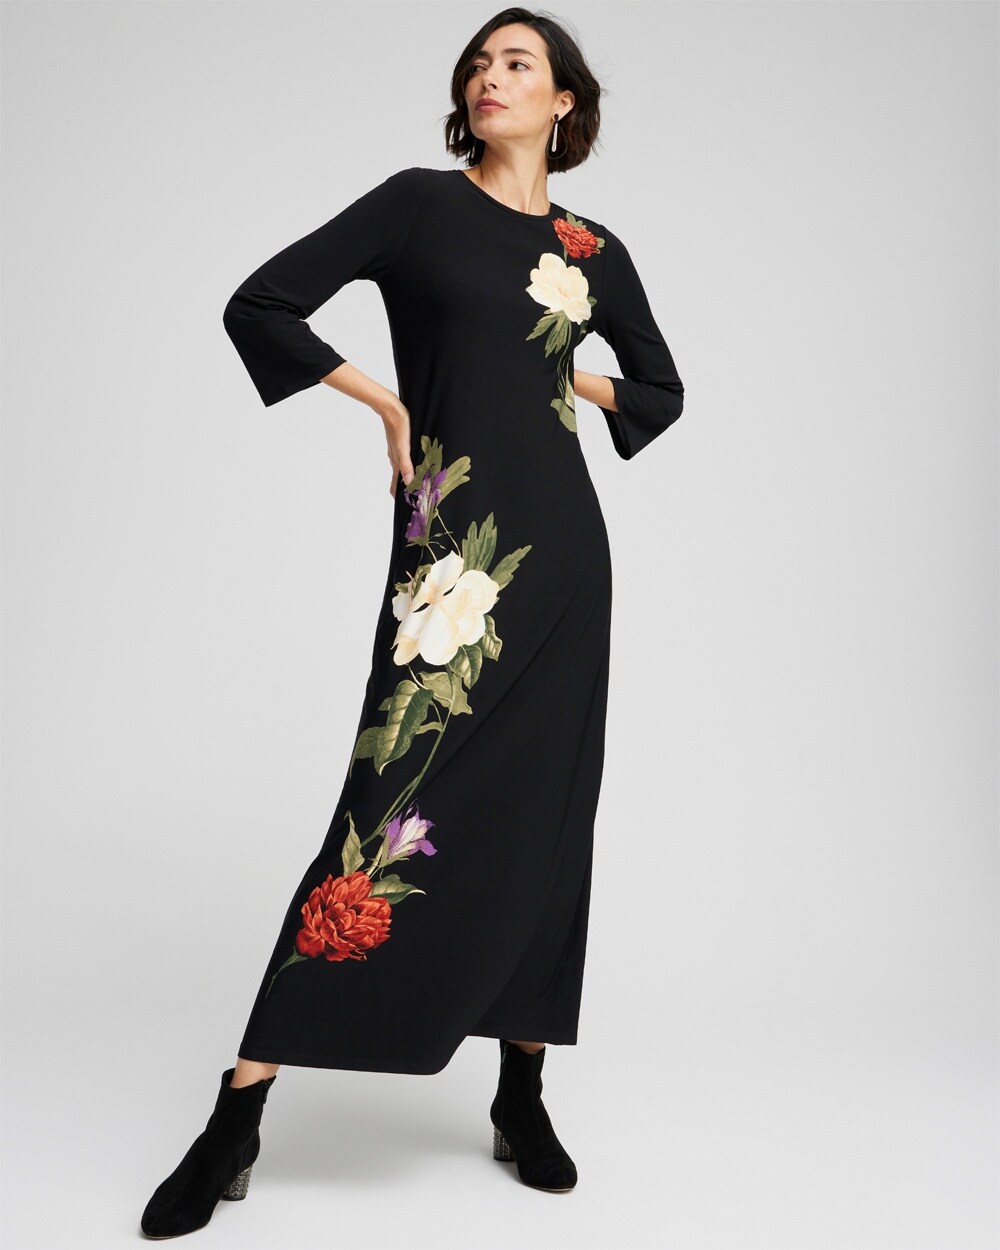 Flare Sleeve Floral Maxi Dress video preview image, click to start video